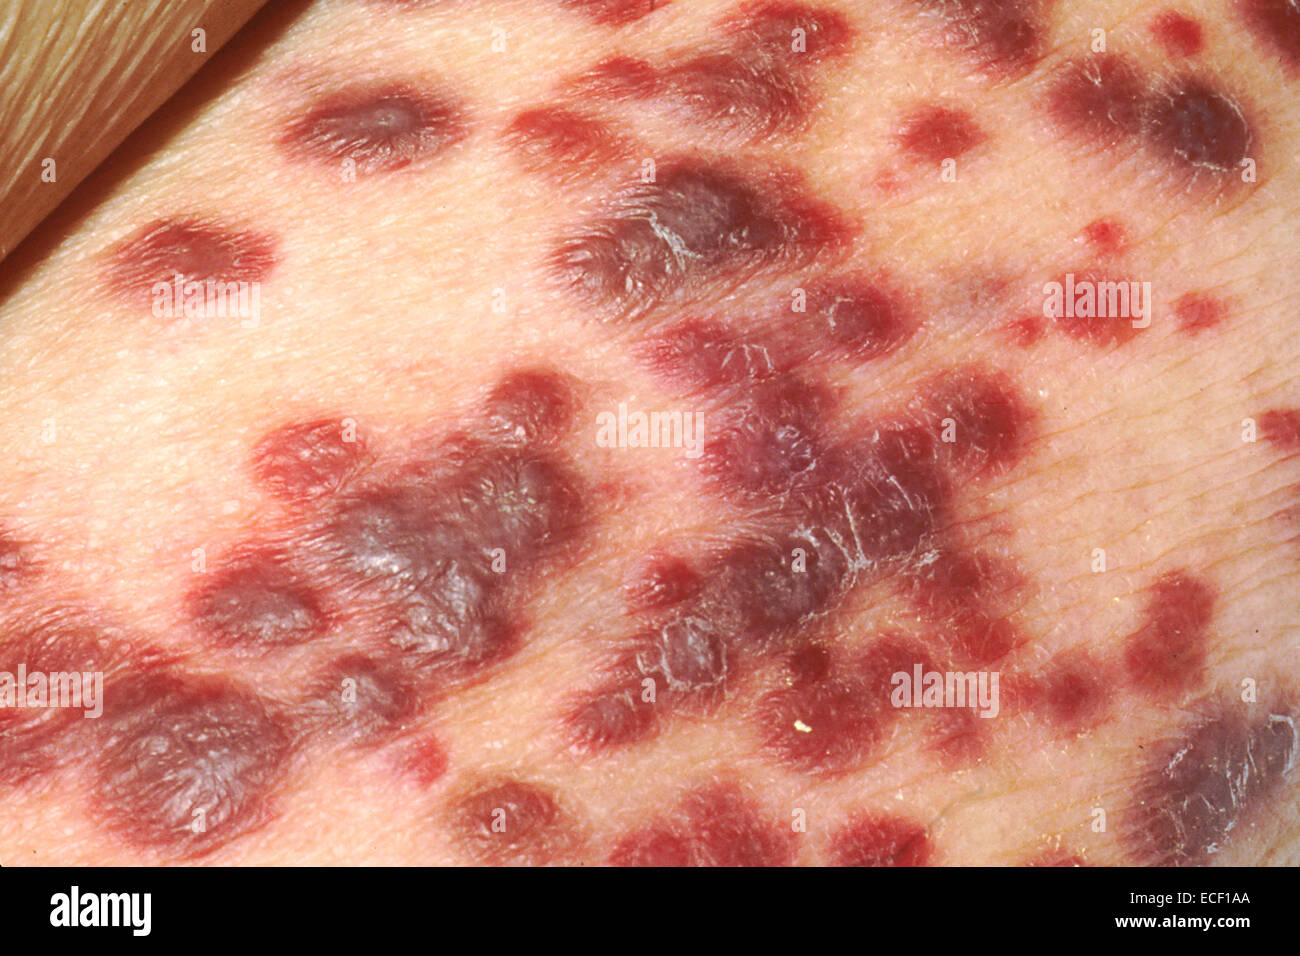 Kaposi's sarcoma on the skin of an AIDS patient. Stock Photo